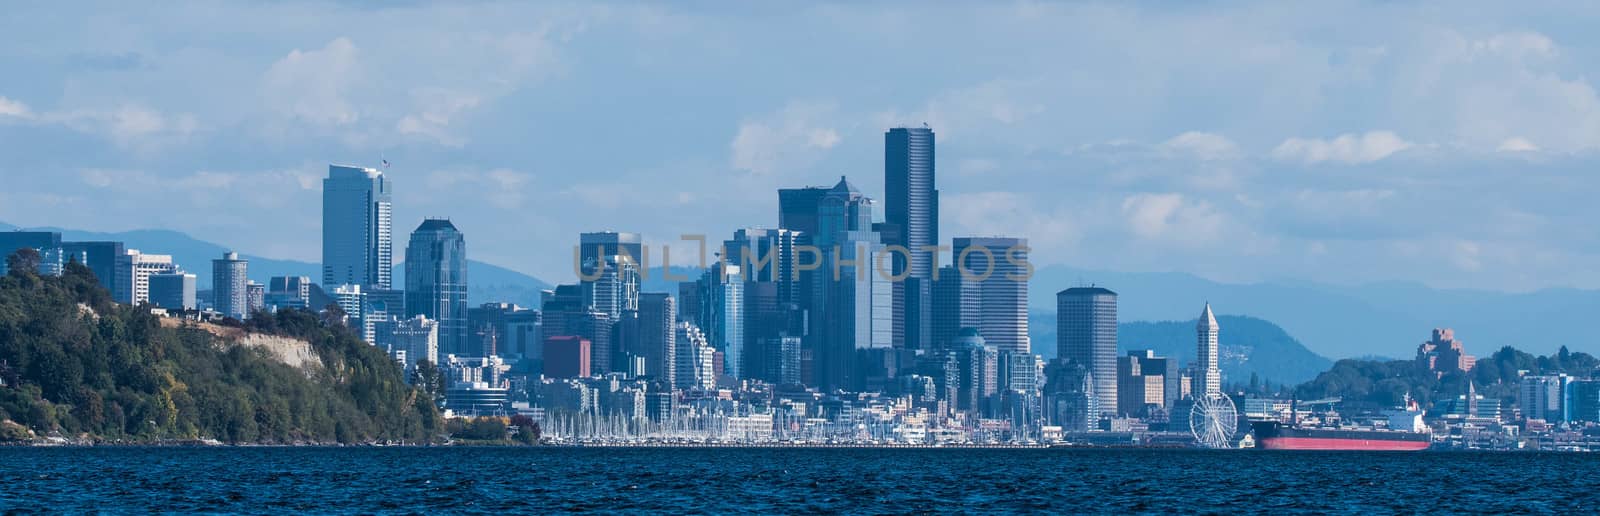 Seattle Cityscape from Magnolia, taken from Puget Sound by cestes001